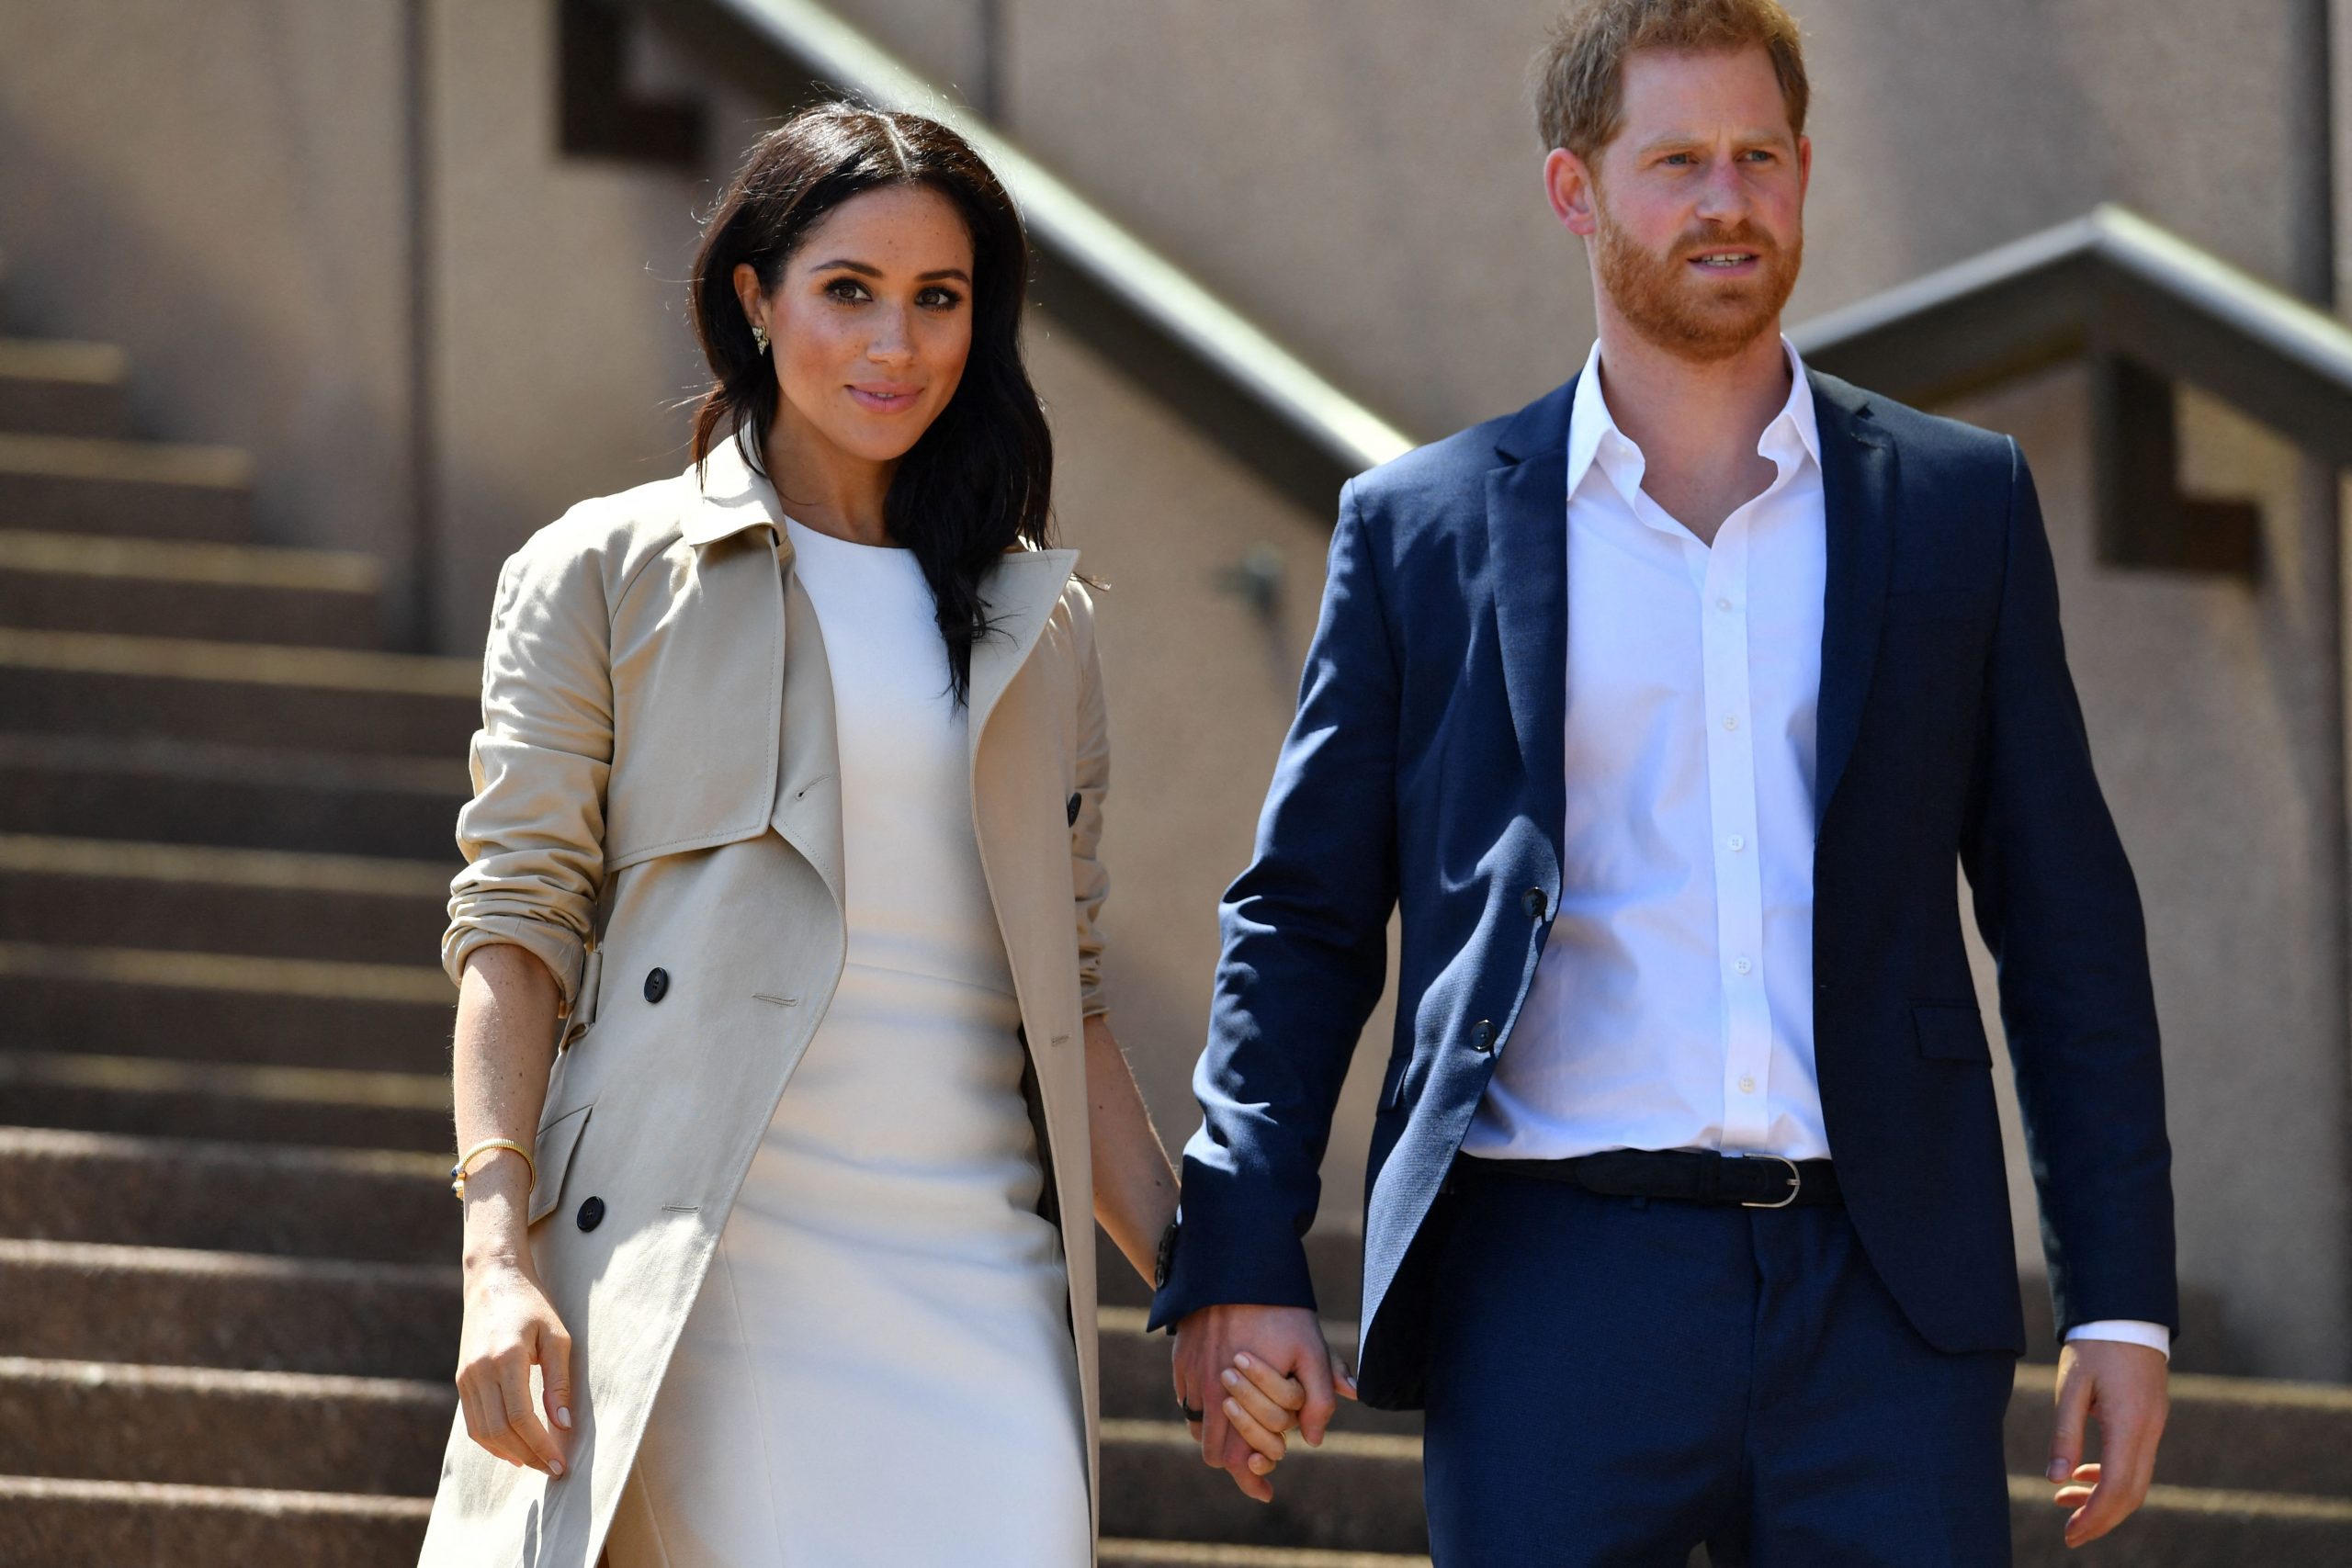 Meghan Markle’s book for kids inspired by Prince Harry-Archie relationship